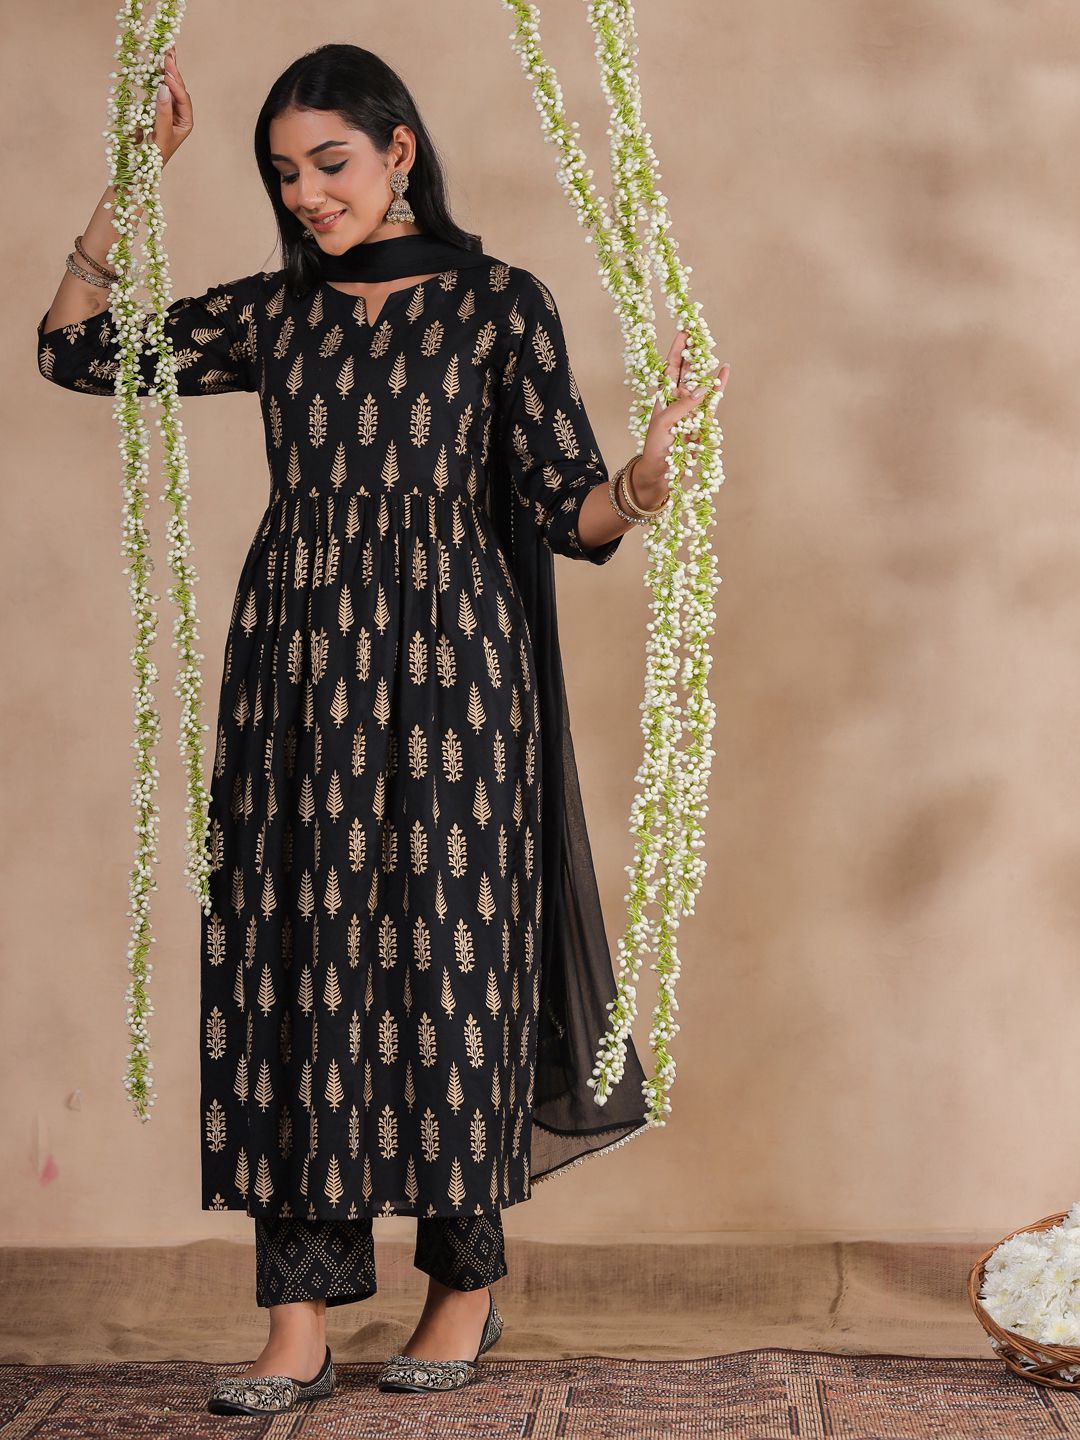     			Anubhutee Cotton Printed Kurti With Palazzo Women's Stitched Salwar Suit - Black ( Pack of 1 )